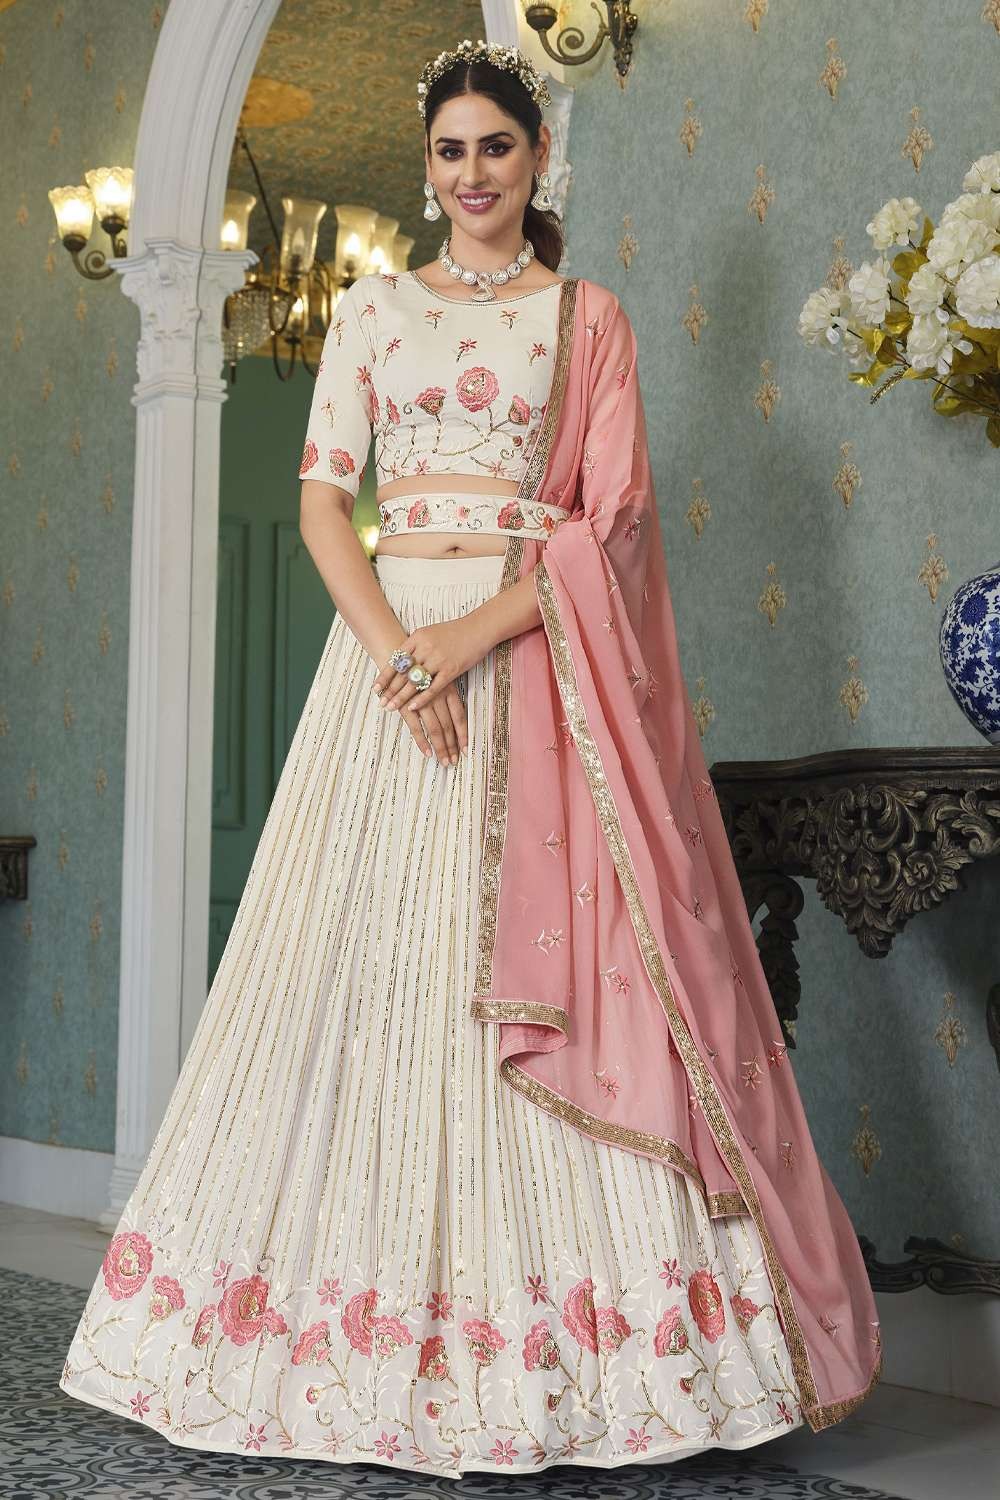 Pearl white Lehenga Choli with Embroidered Georgette - LC6401